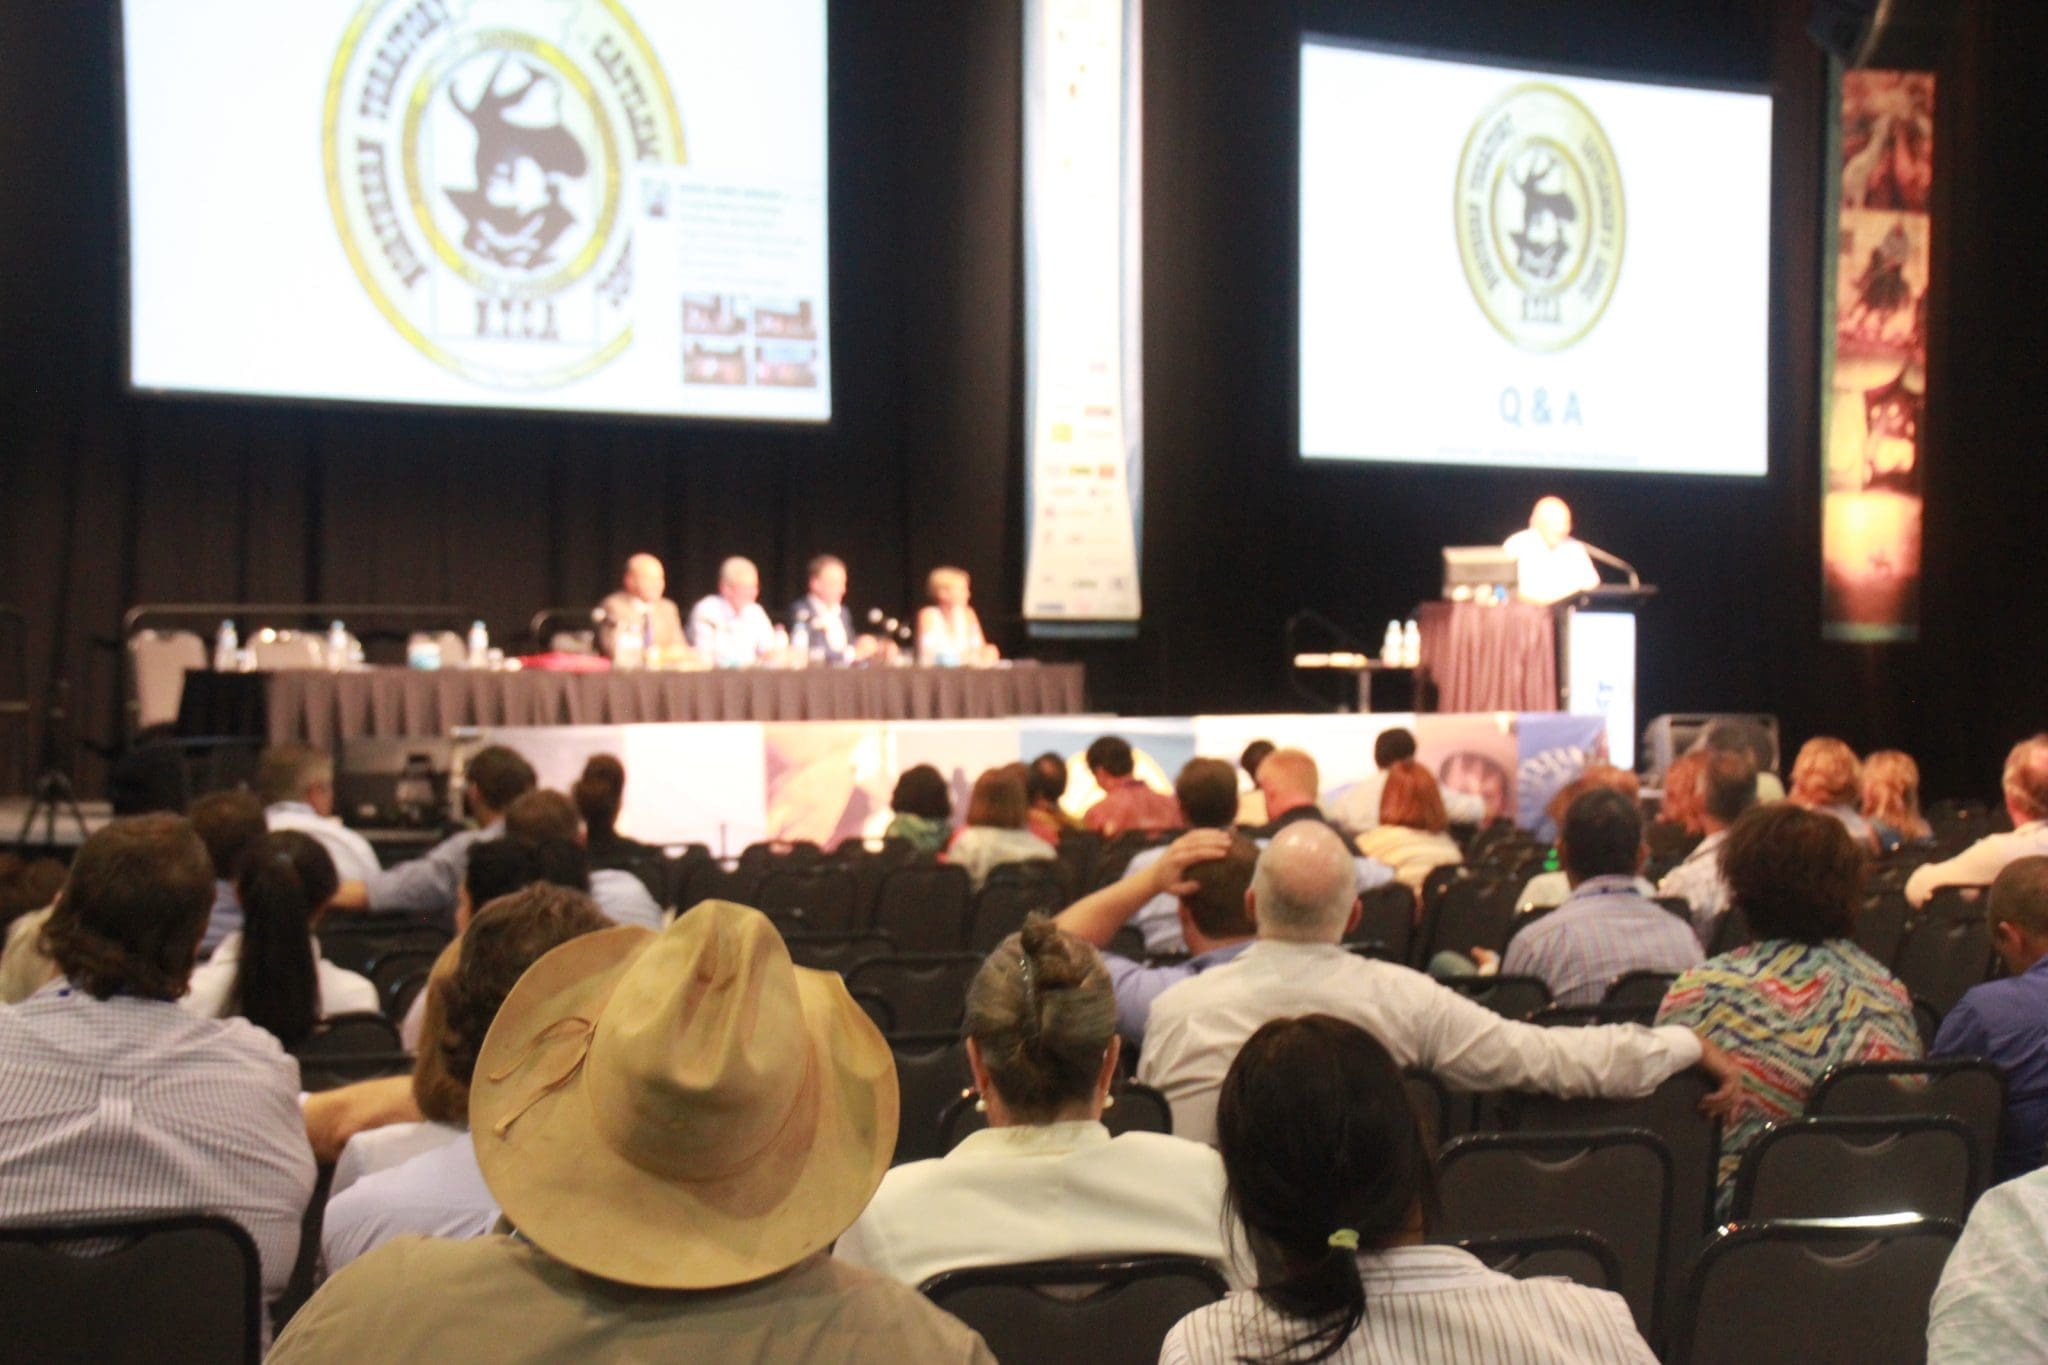 Registrations open for 2021 NT Cattlemens' Association conference in